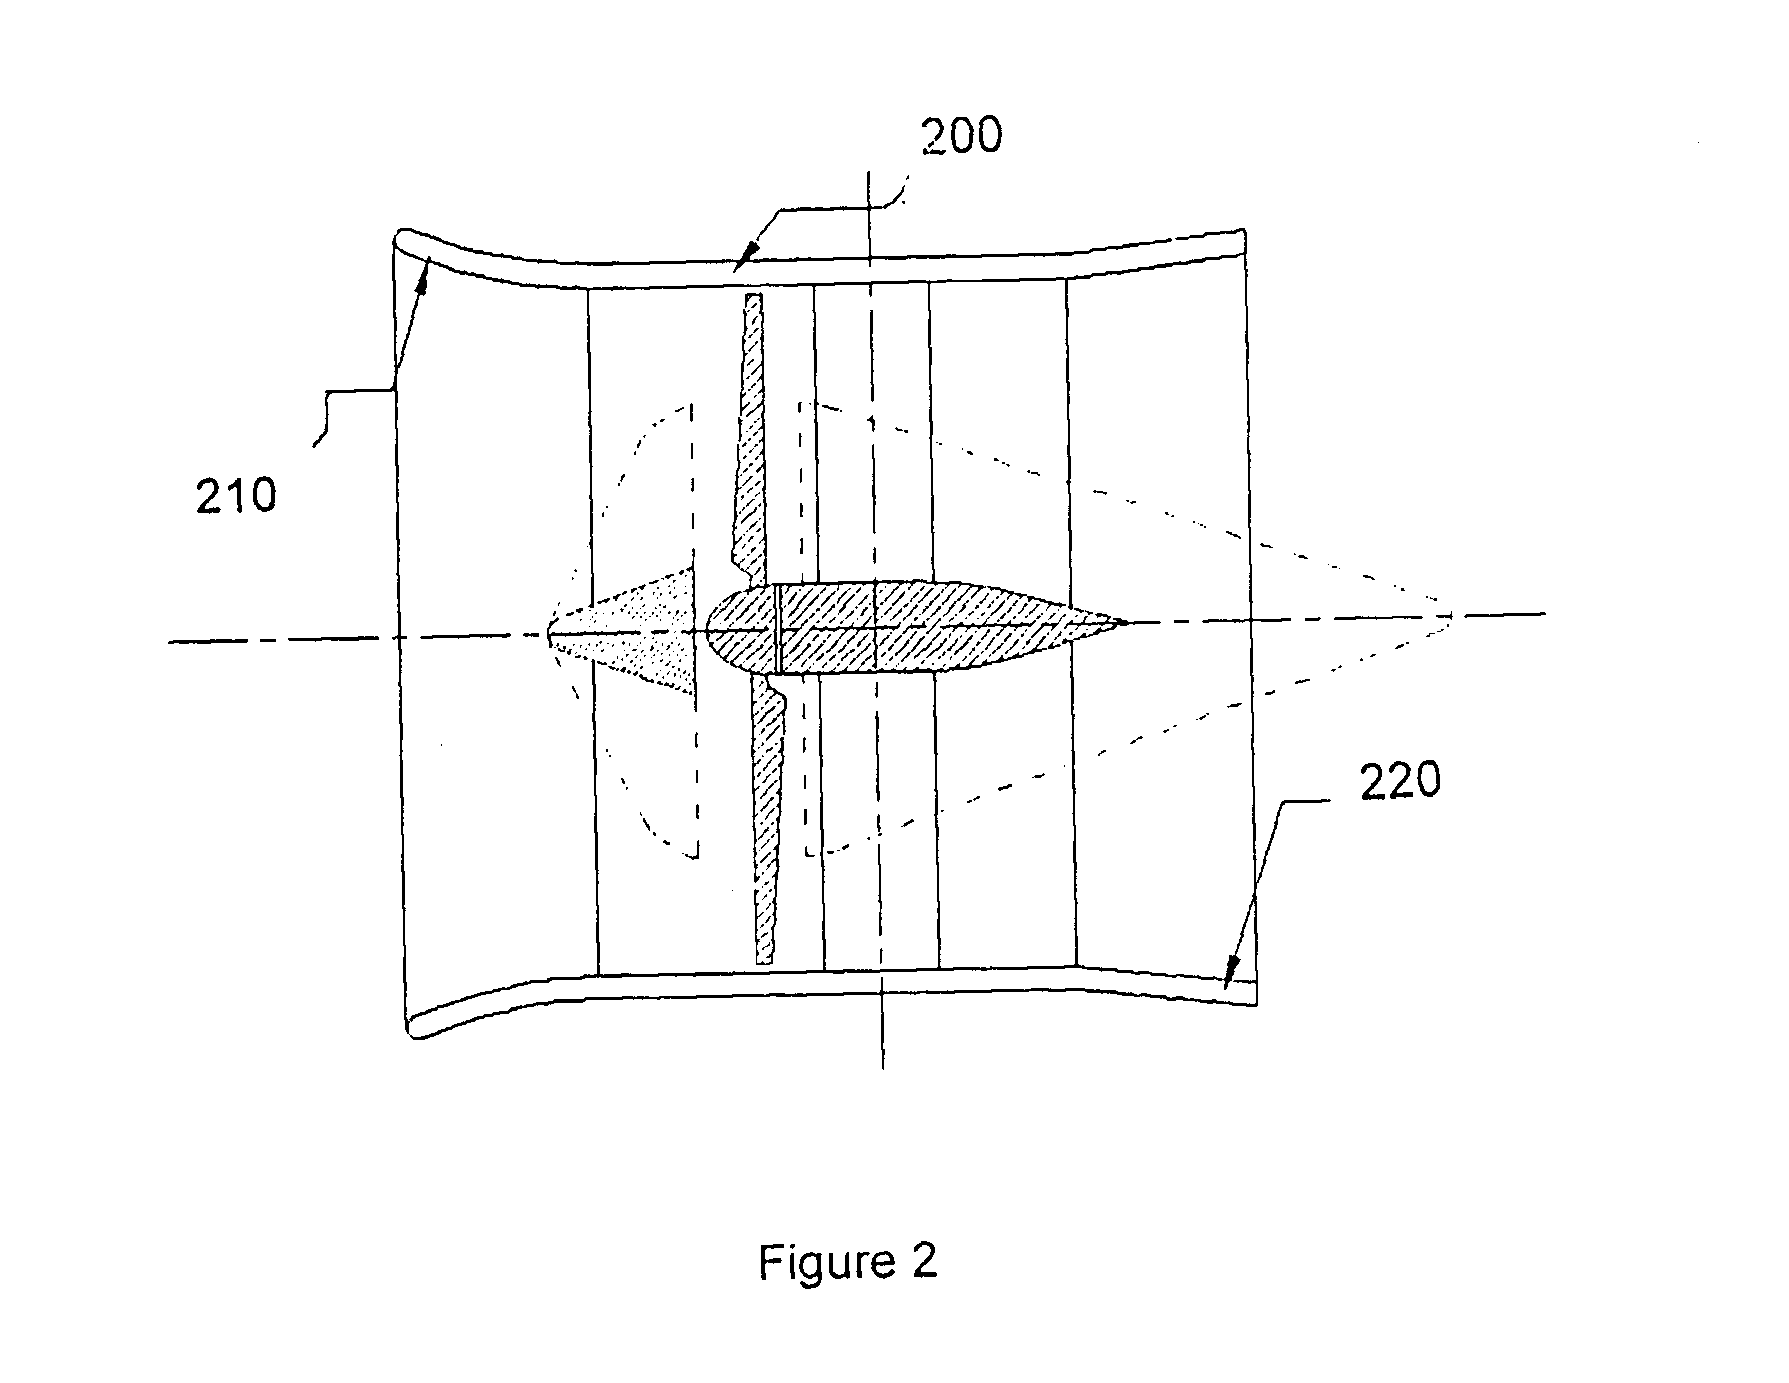 Fluid directing system for turbines